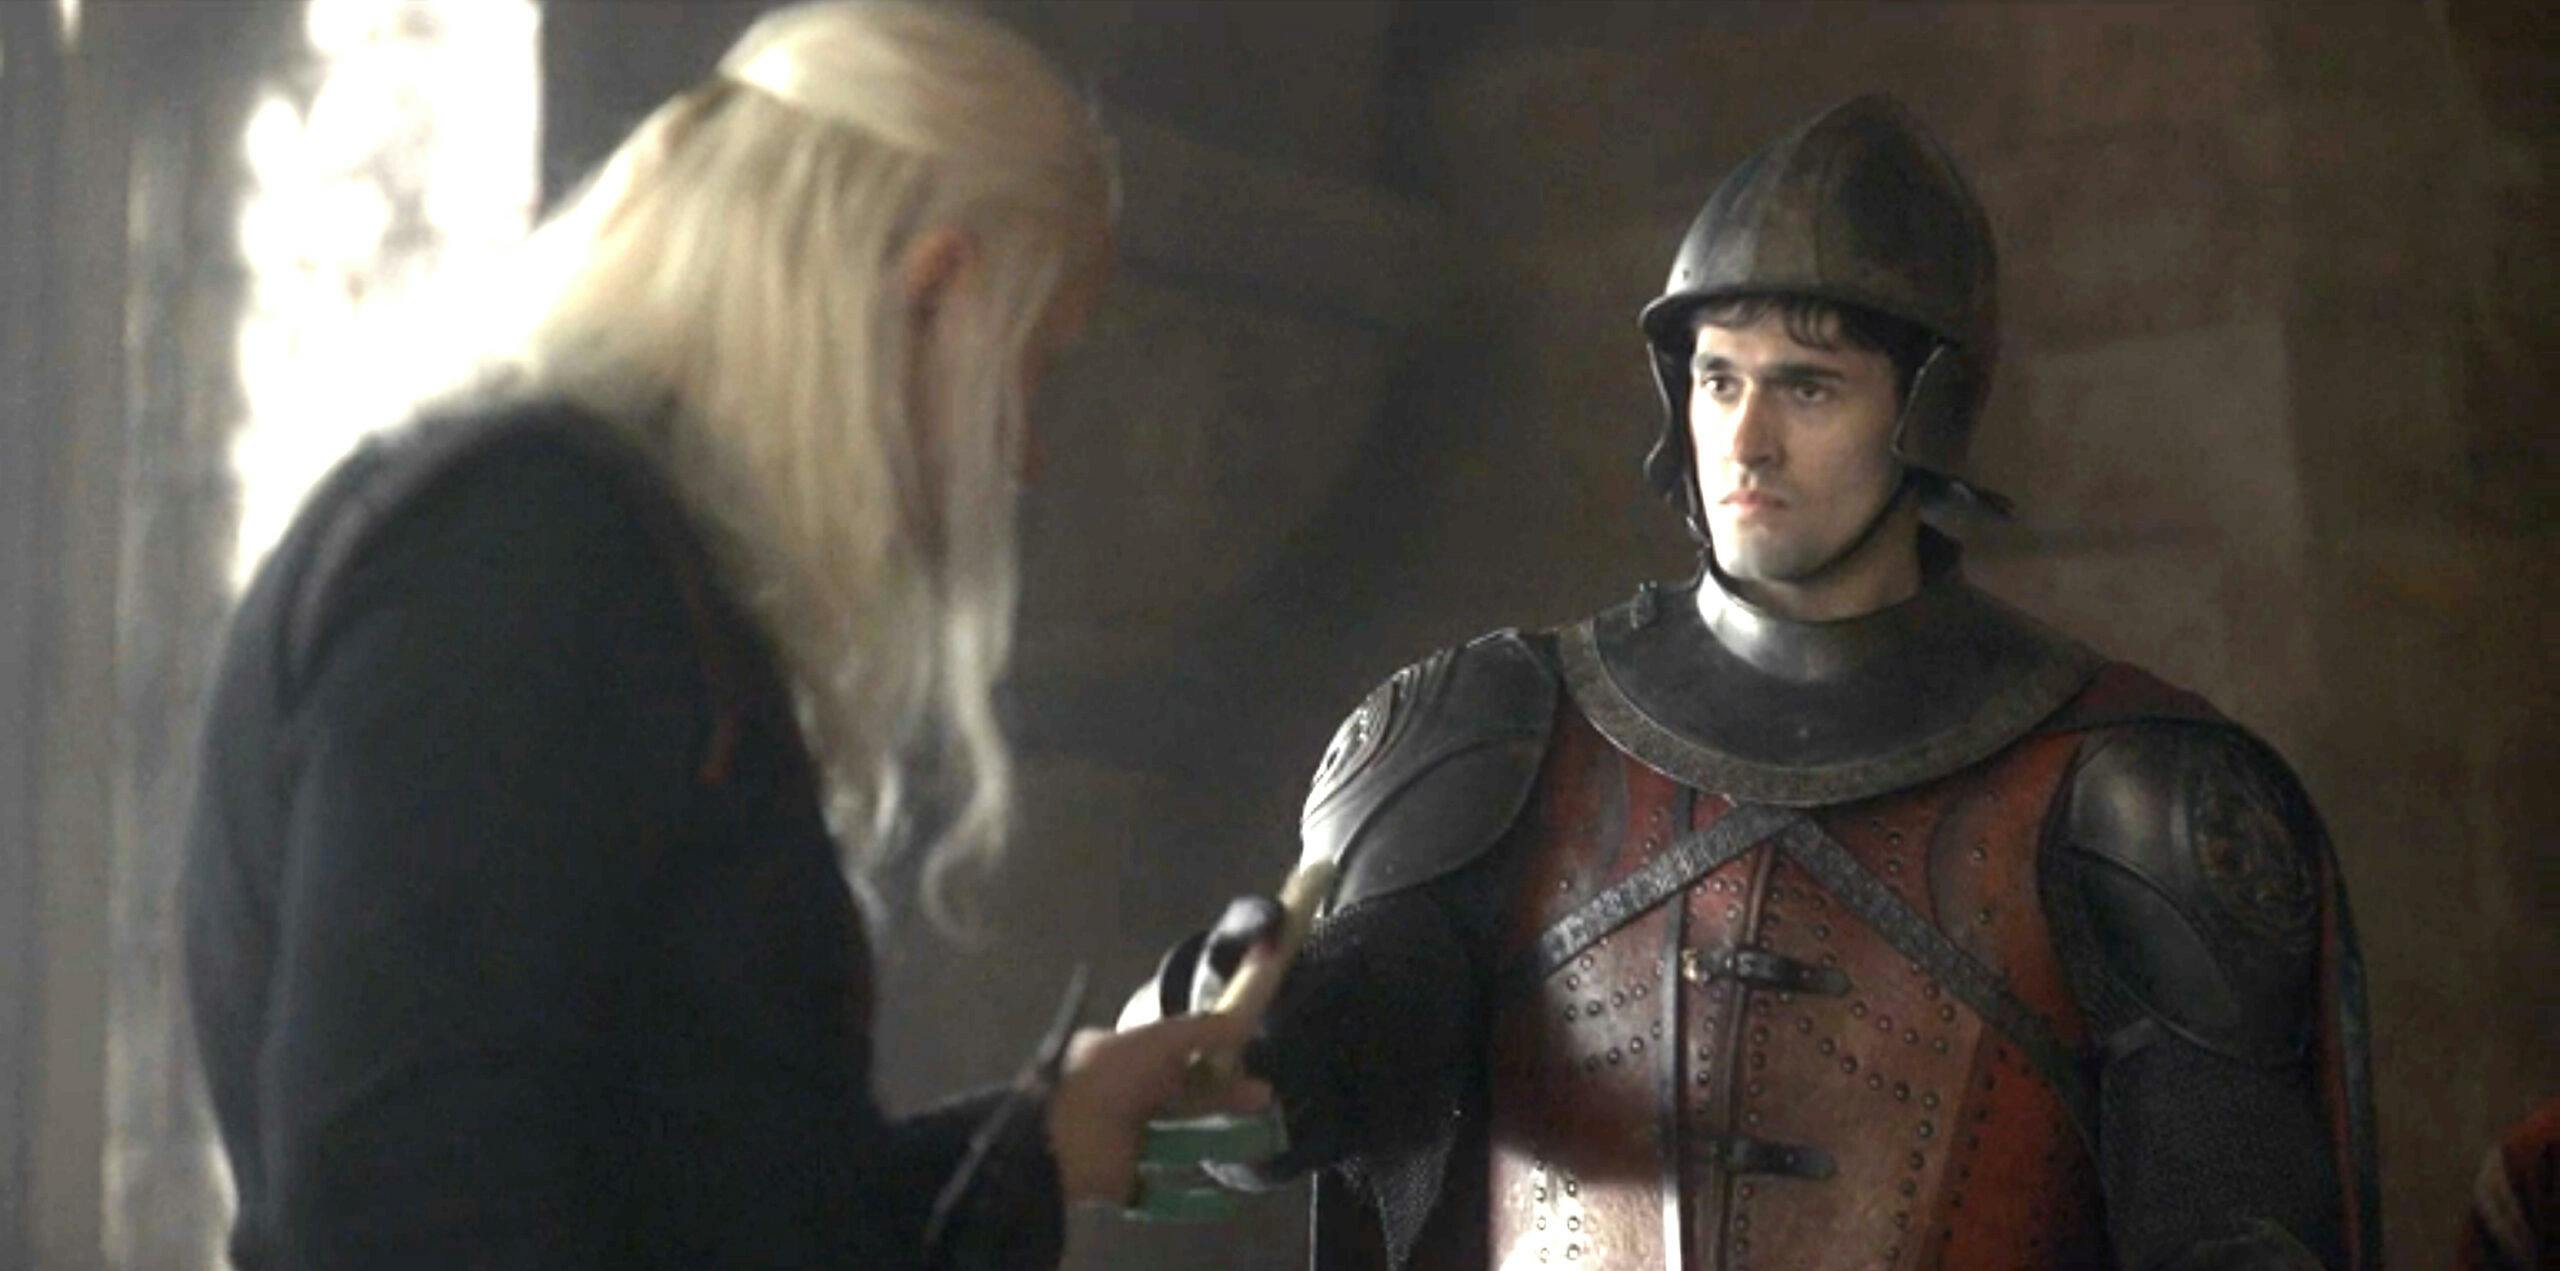 viserys targaryen (left) hands a scroll to a messenger (right) in house of the dragon